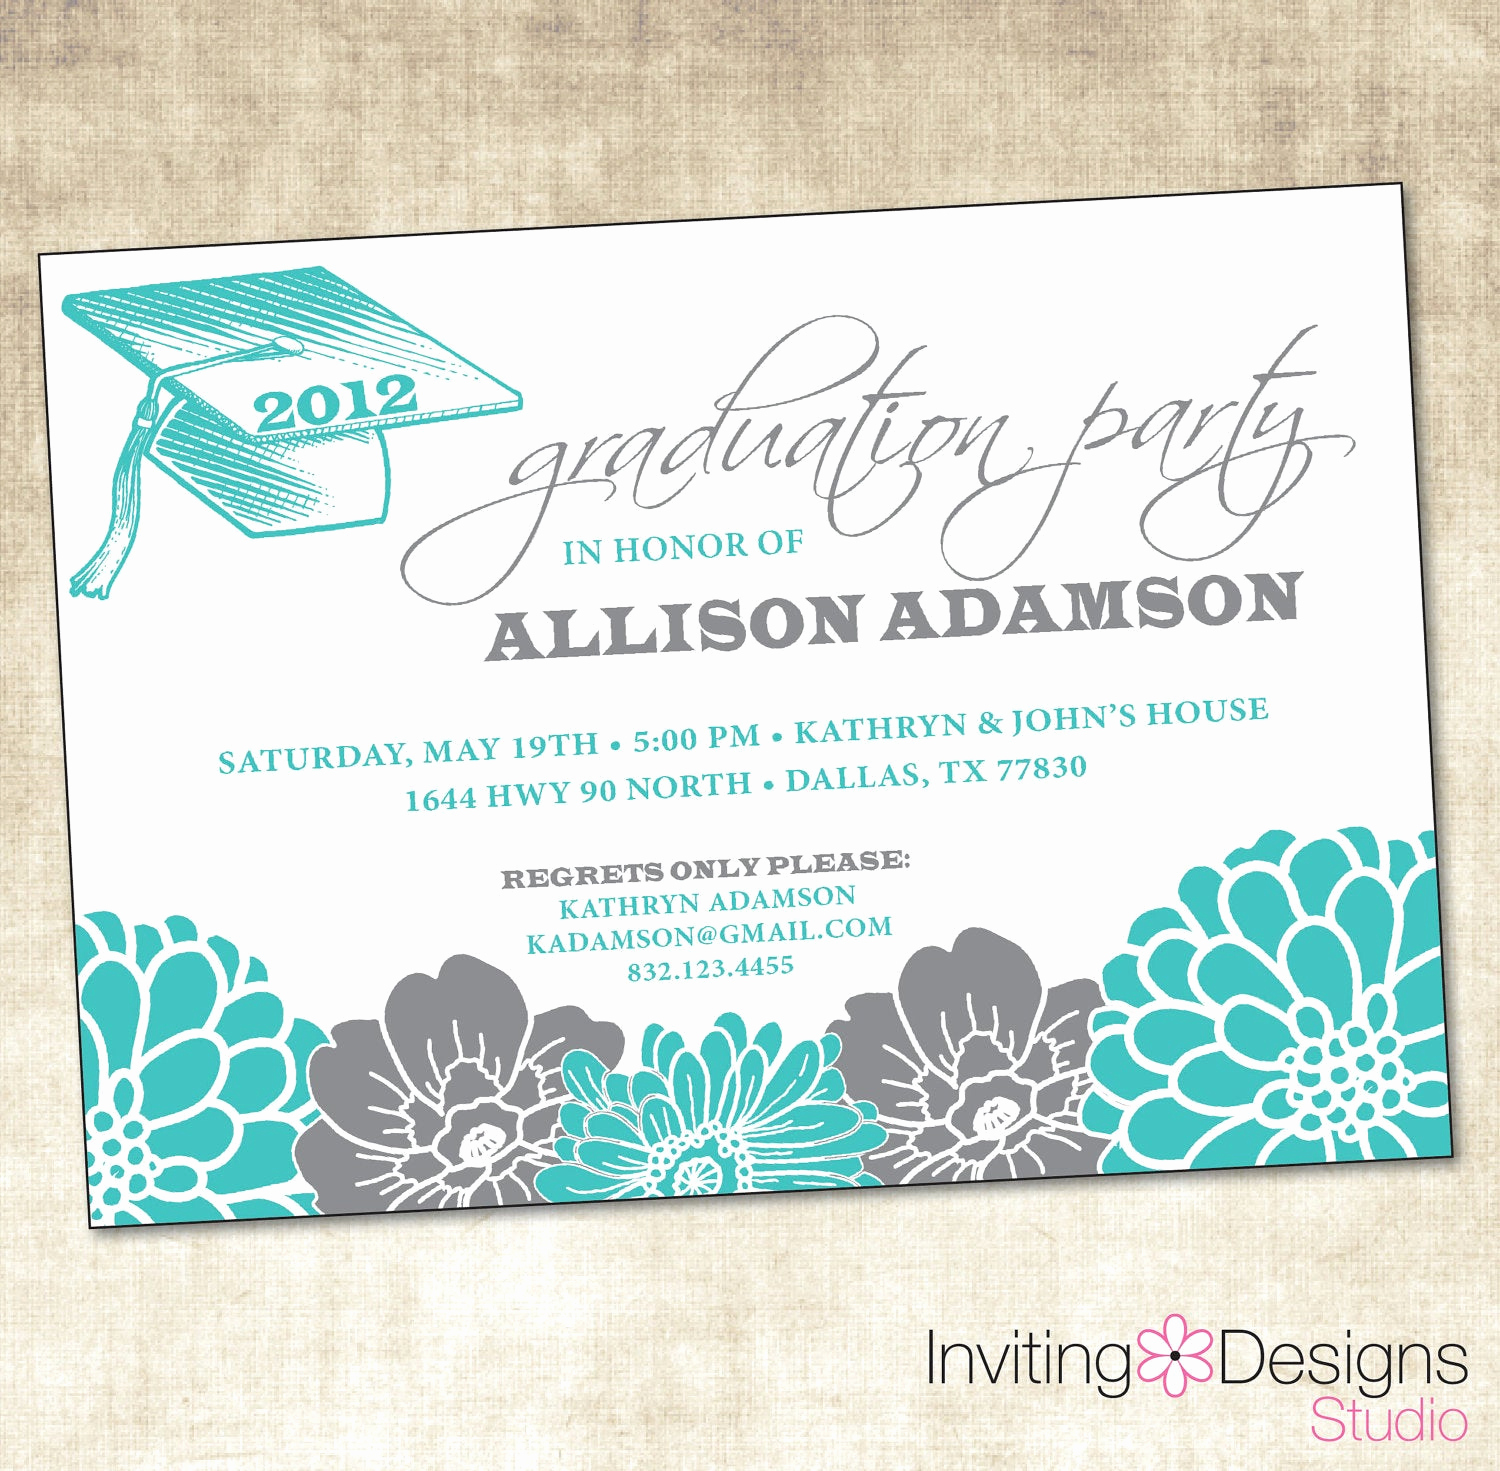 Graduation Announcement and Party Invitation Luxury Graduation Party Invitation Printable File